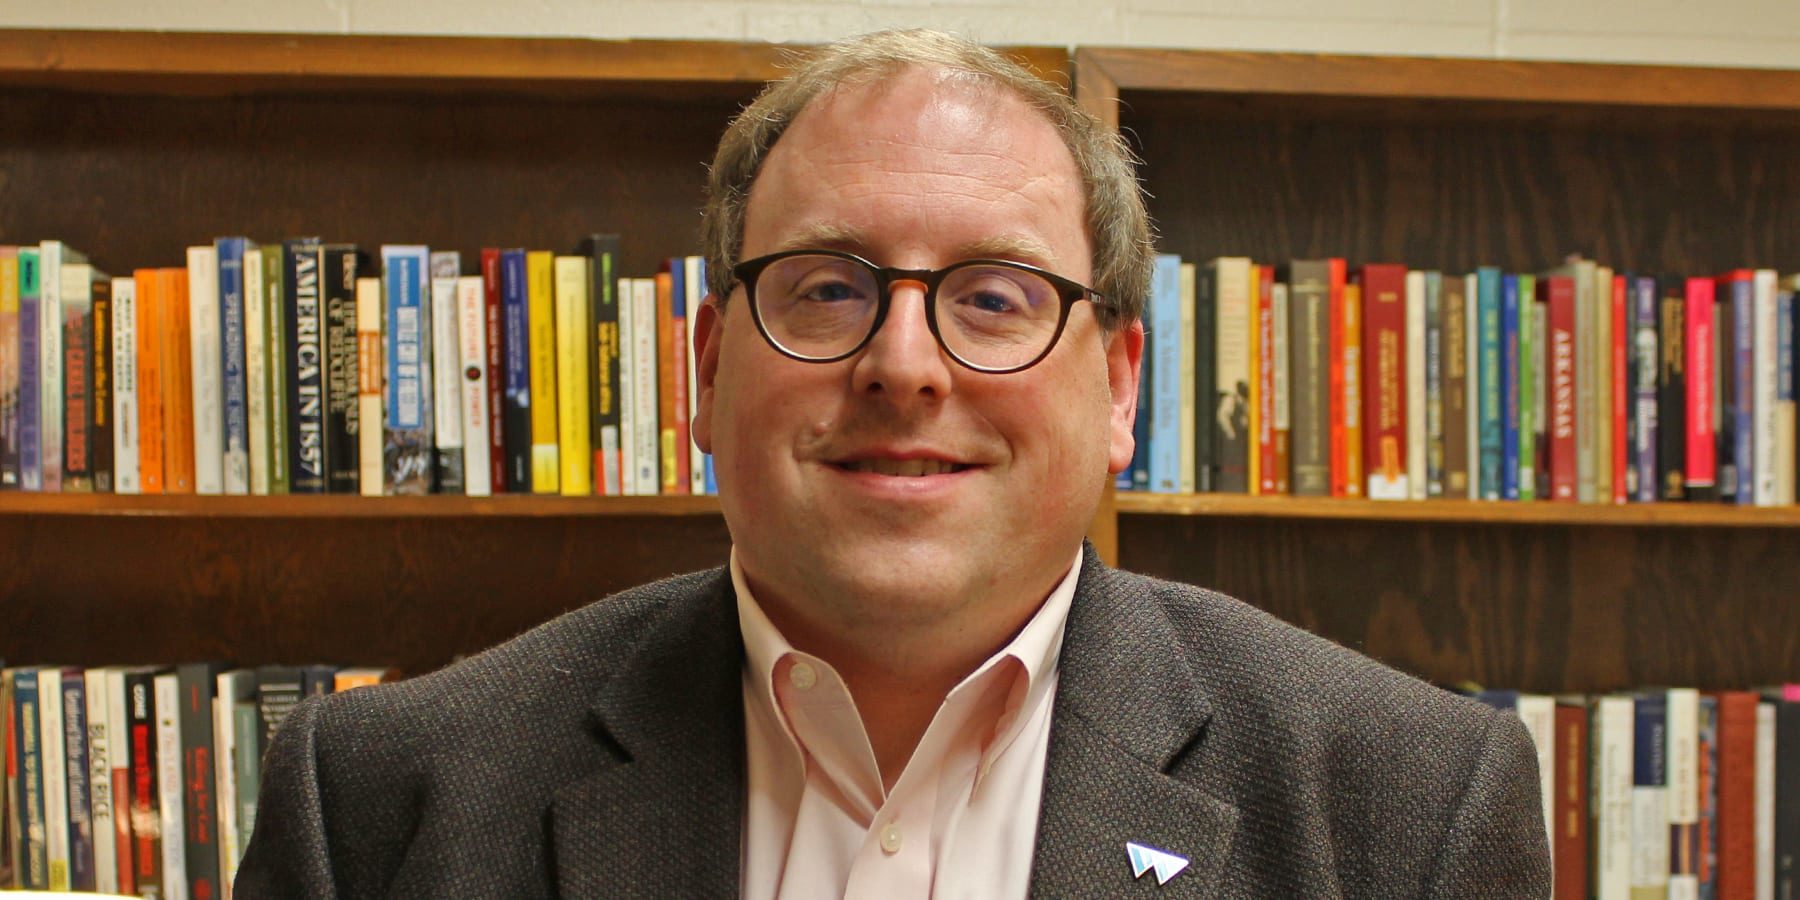 Photograph of a man wearing glasses and a sport coat in a library.